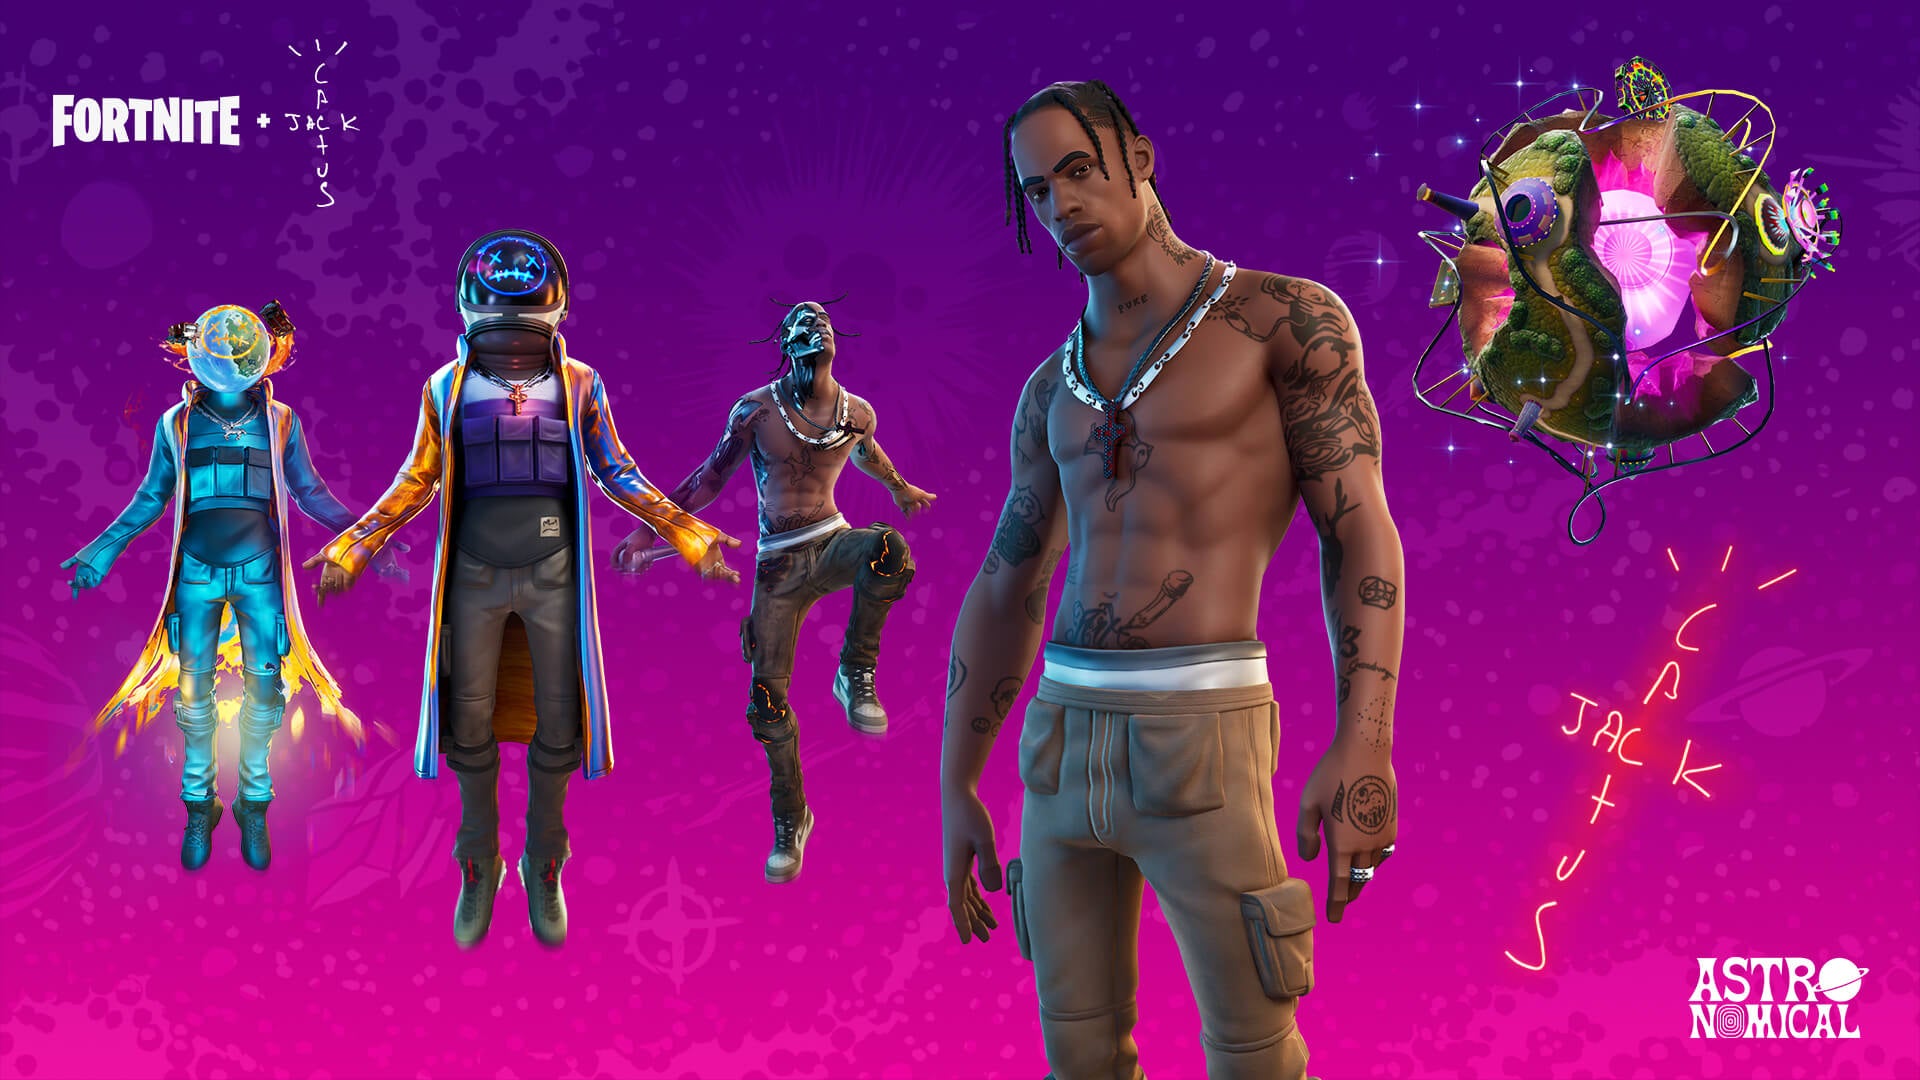 Epic has pulled the Travis Scott emote from Fortnite's shop following  concert tragedy | VG247